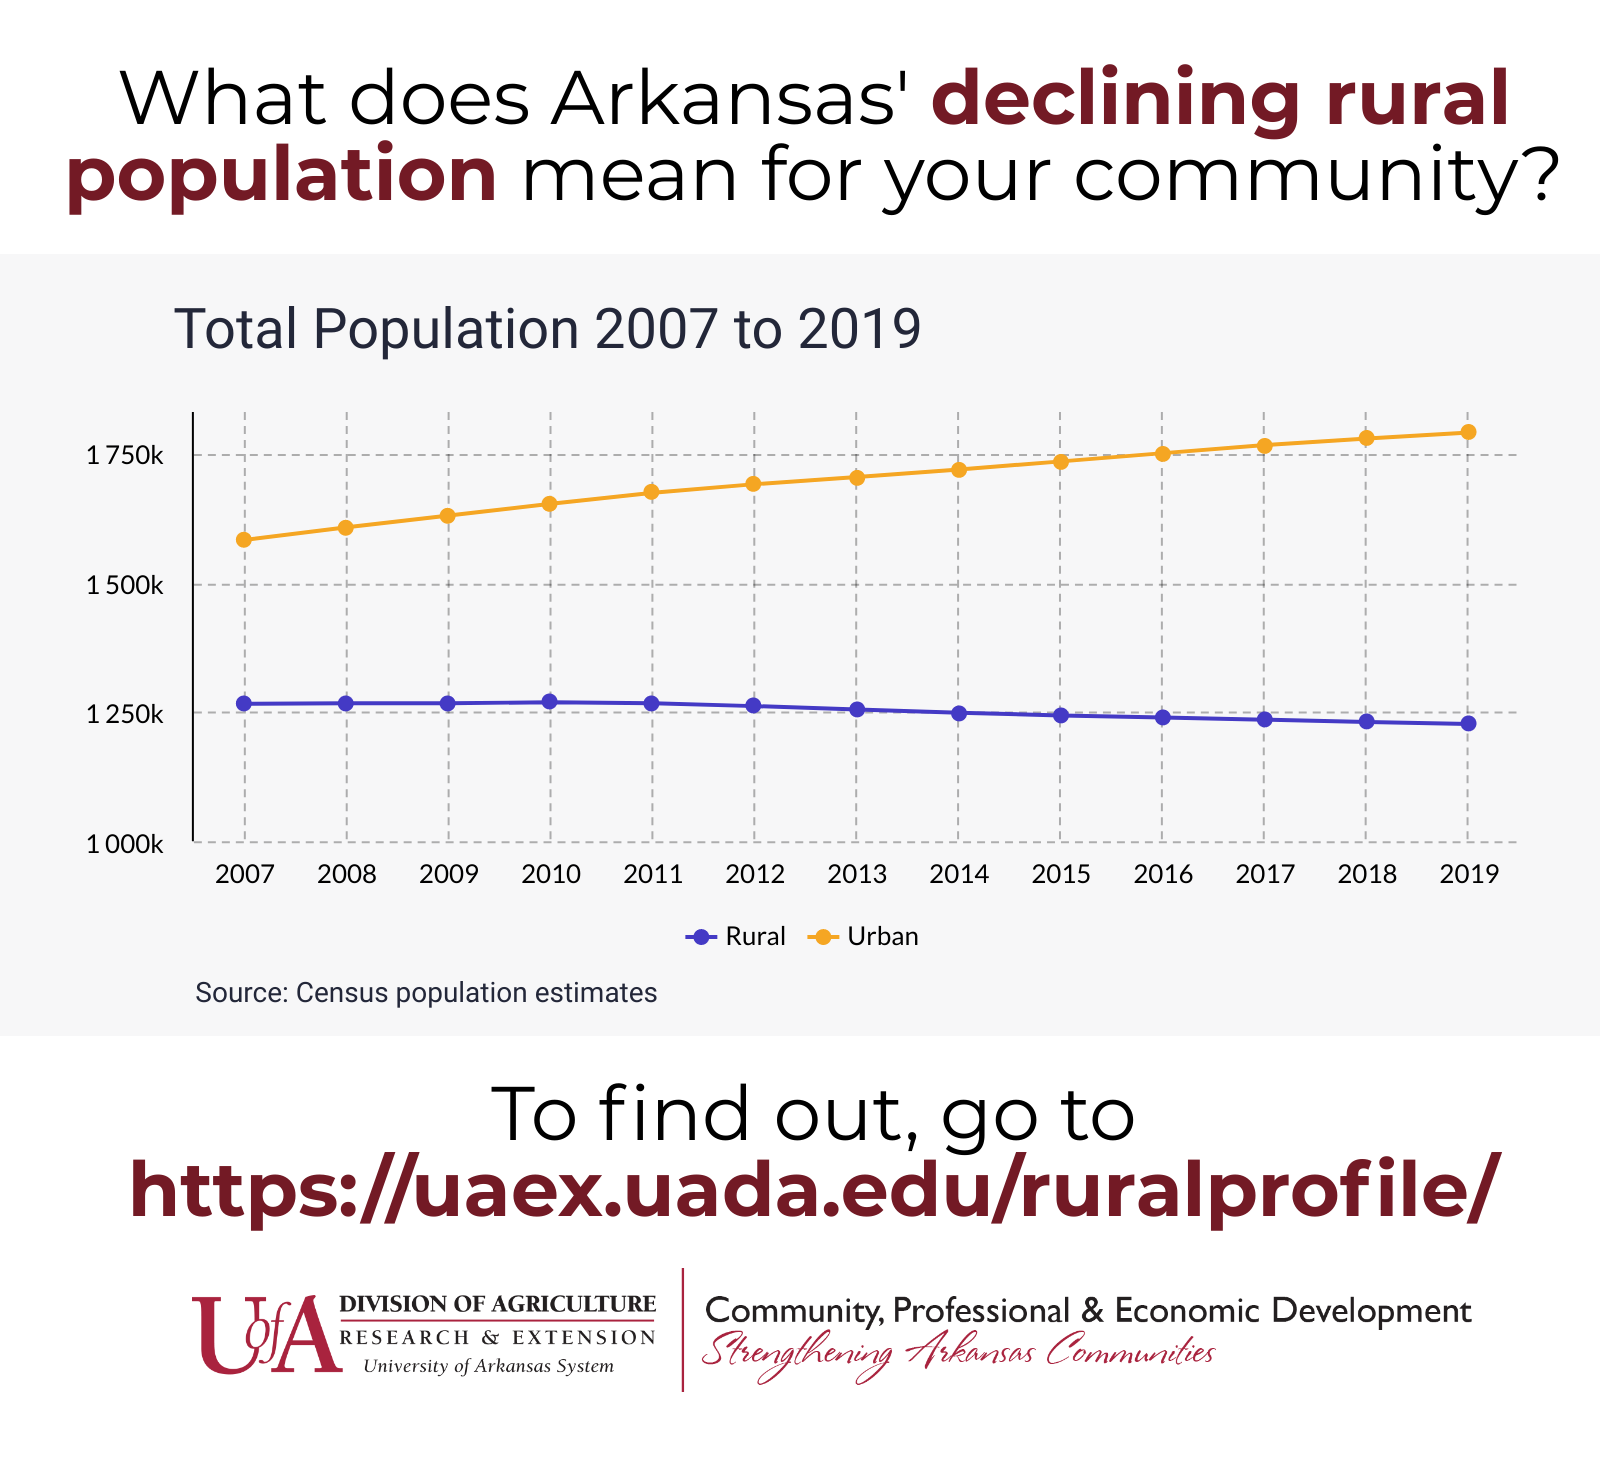 Infographic showing the upward trend in urban population and the downward trend in rural population, from 2007 to 2018. Learn about the issues that matter to your community at www.uaex.uada.edu/ruralprofile.